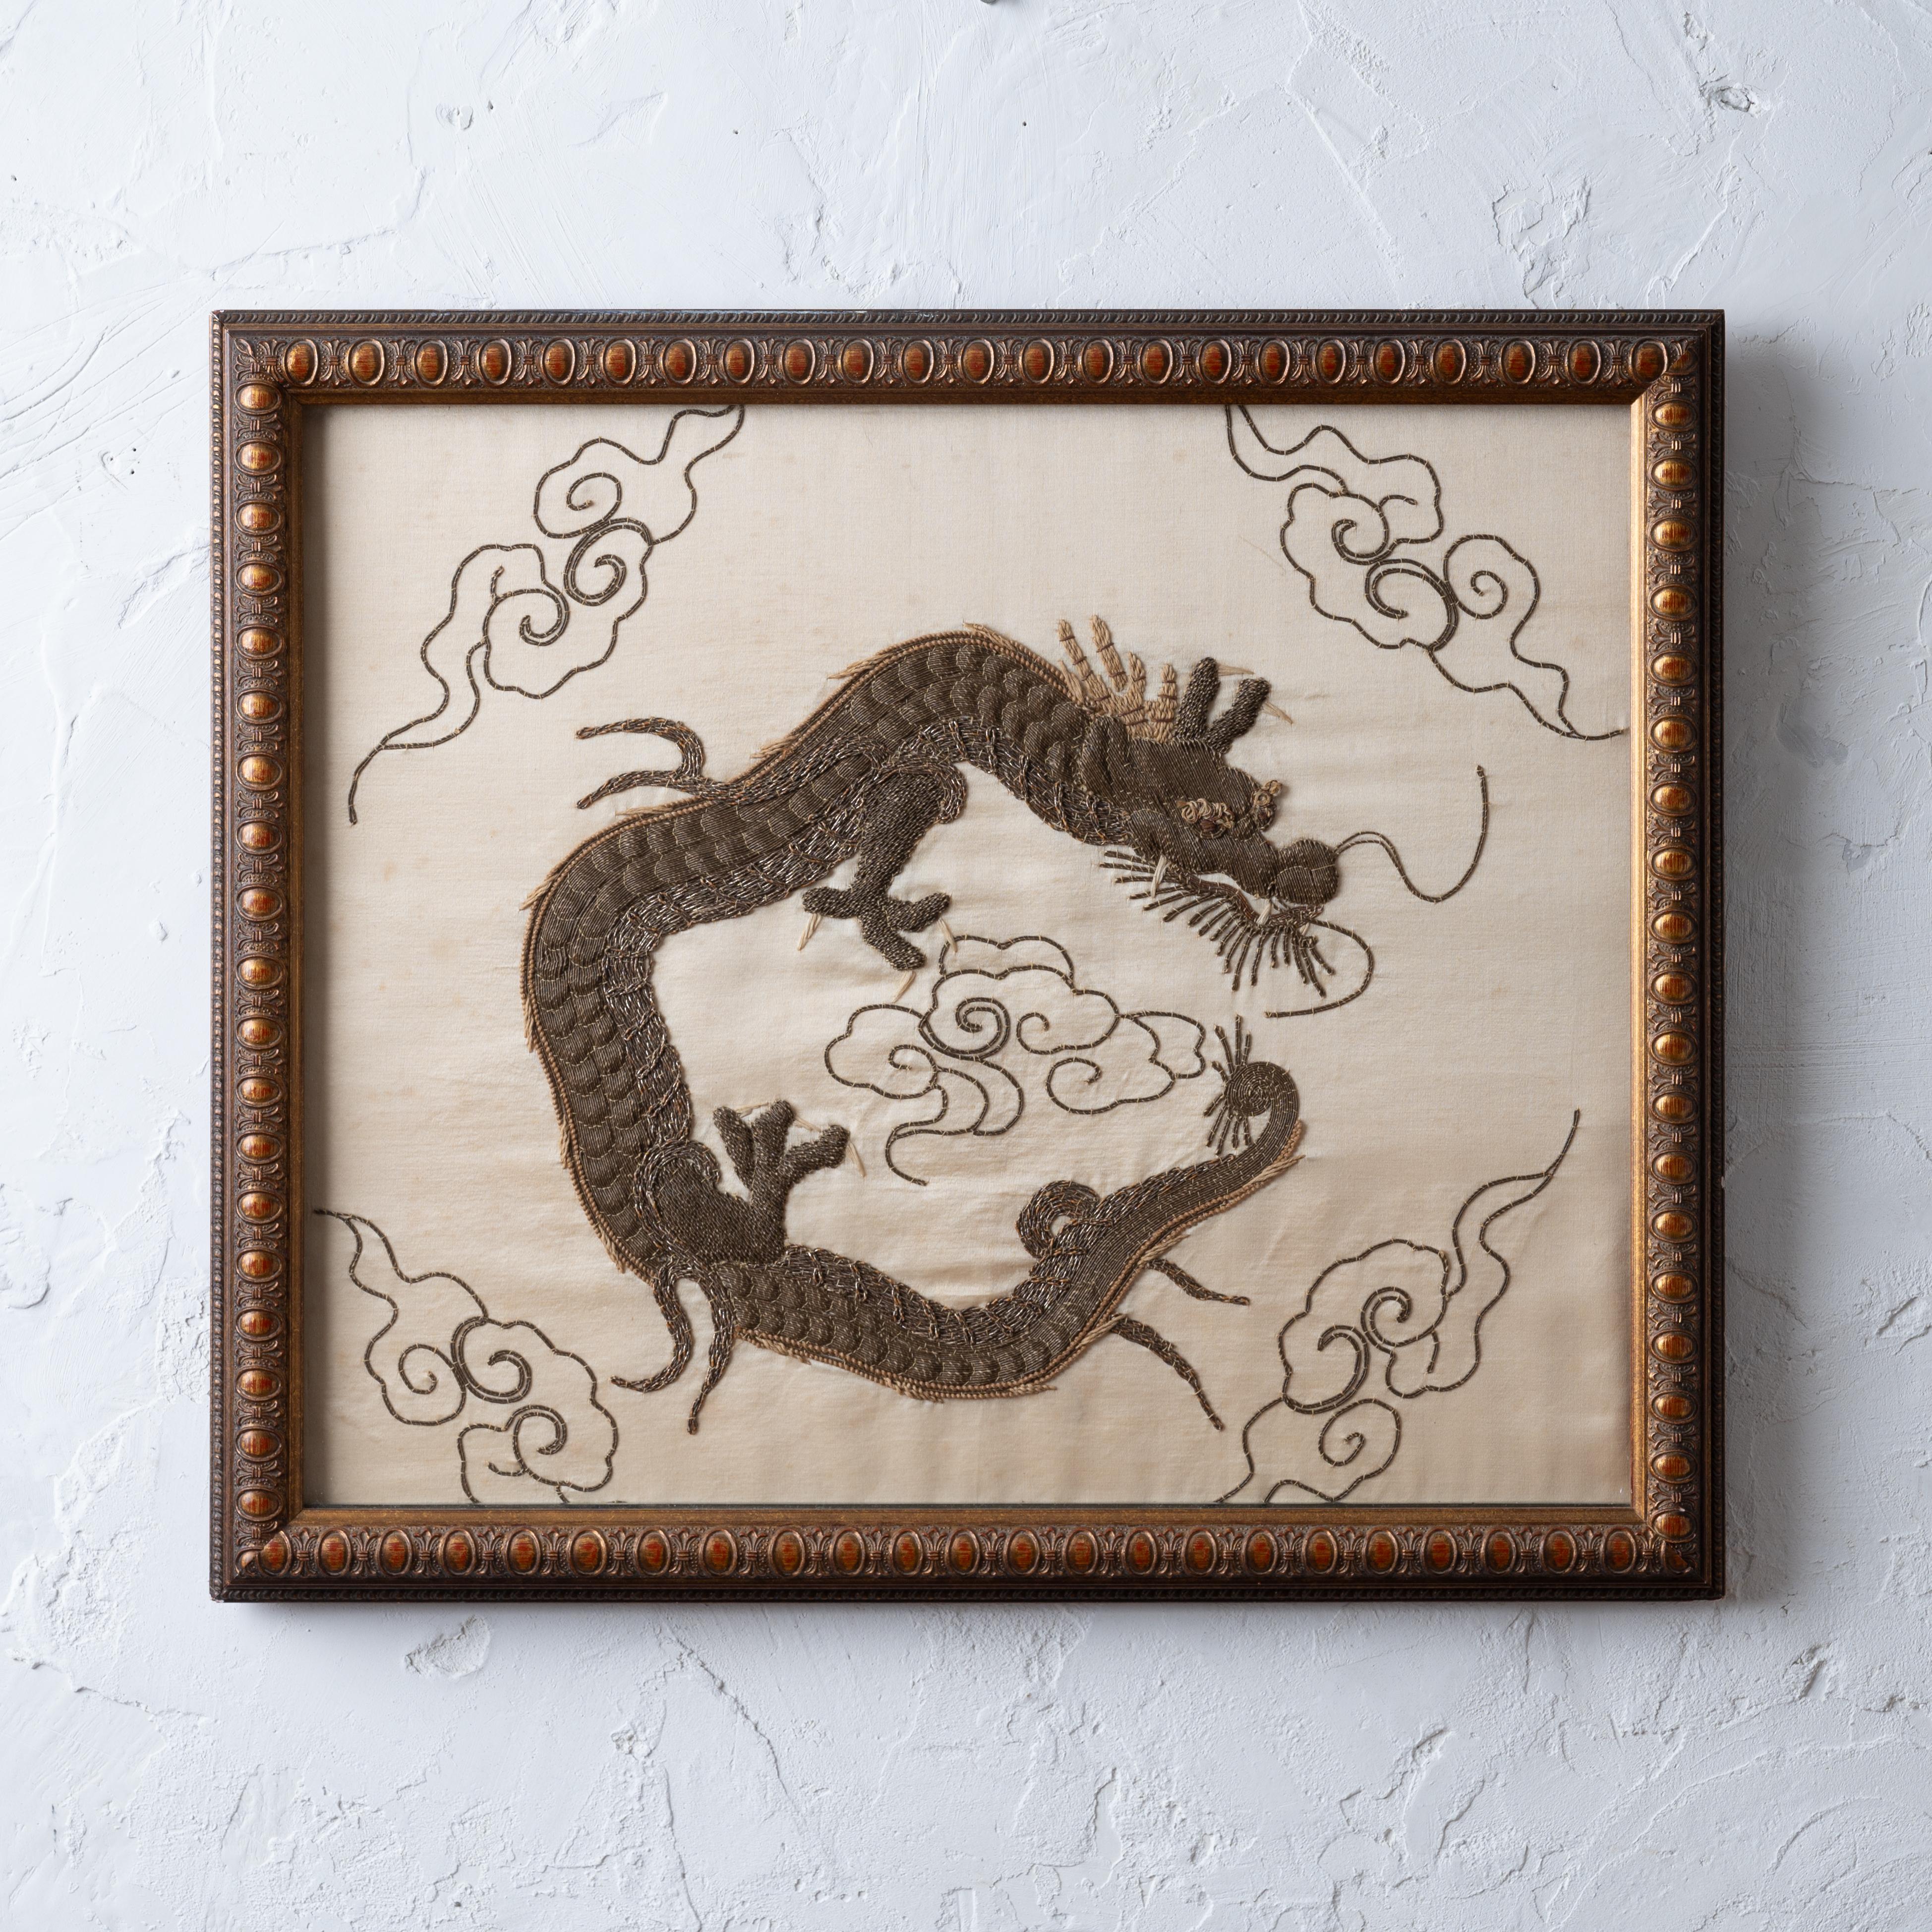 A Japanese silk dragon embroidery in high relief, late 19th century.

23 ½ by 20 inches

